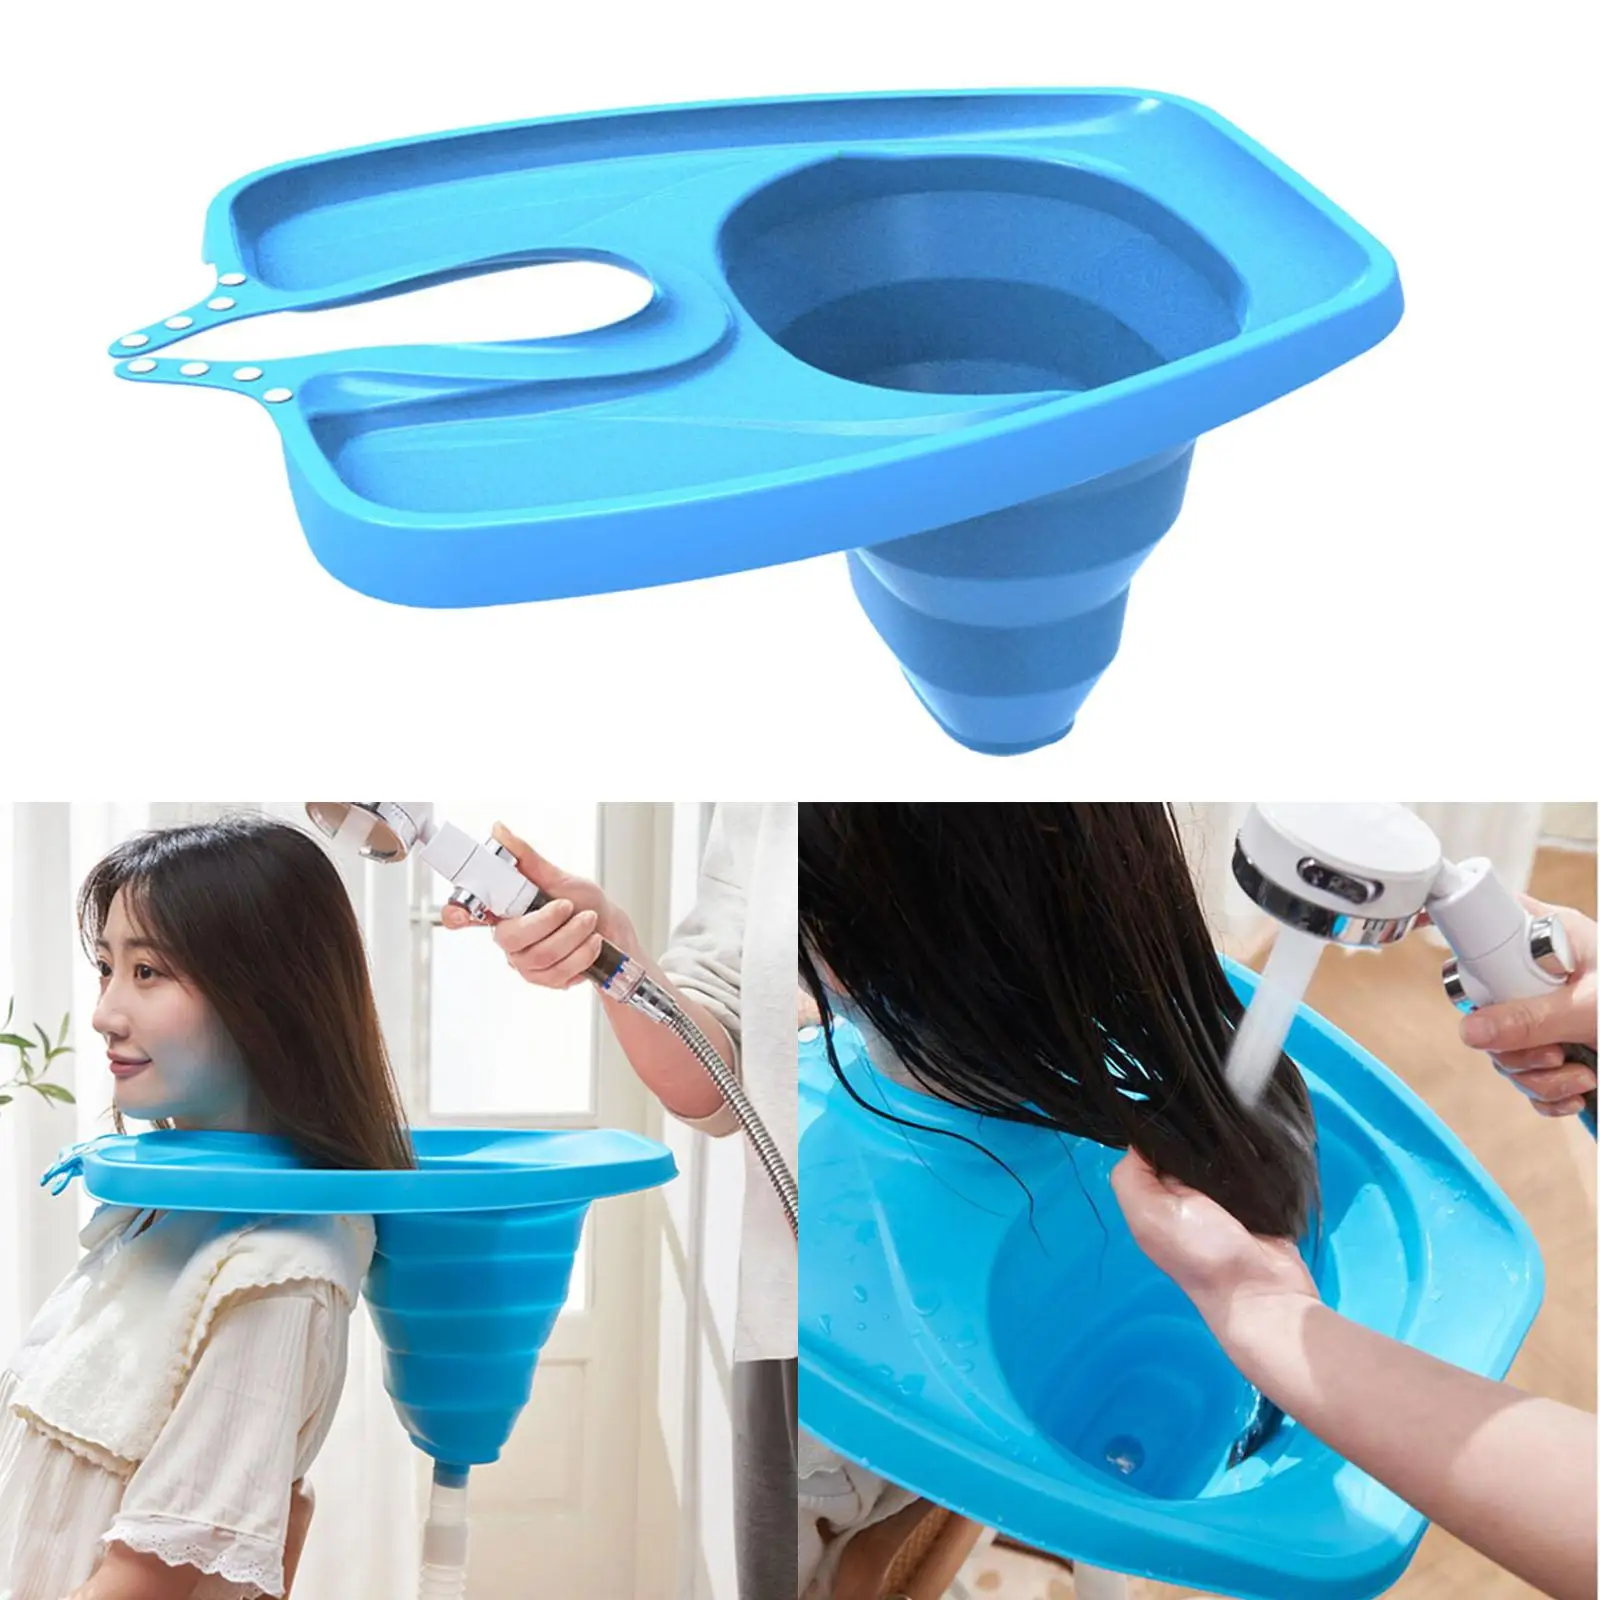 Hanging Hair Washing Basin Tray Foldable Portable Ergonomics Shampoo Sink Mobile Tray for Hair Salon Pregnant Teen Old Patients